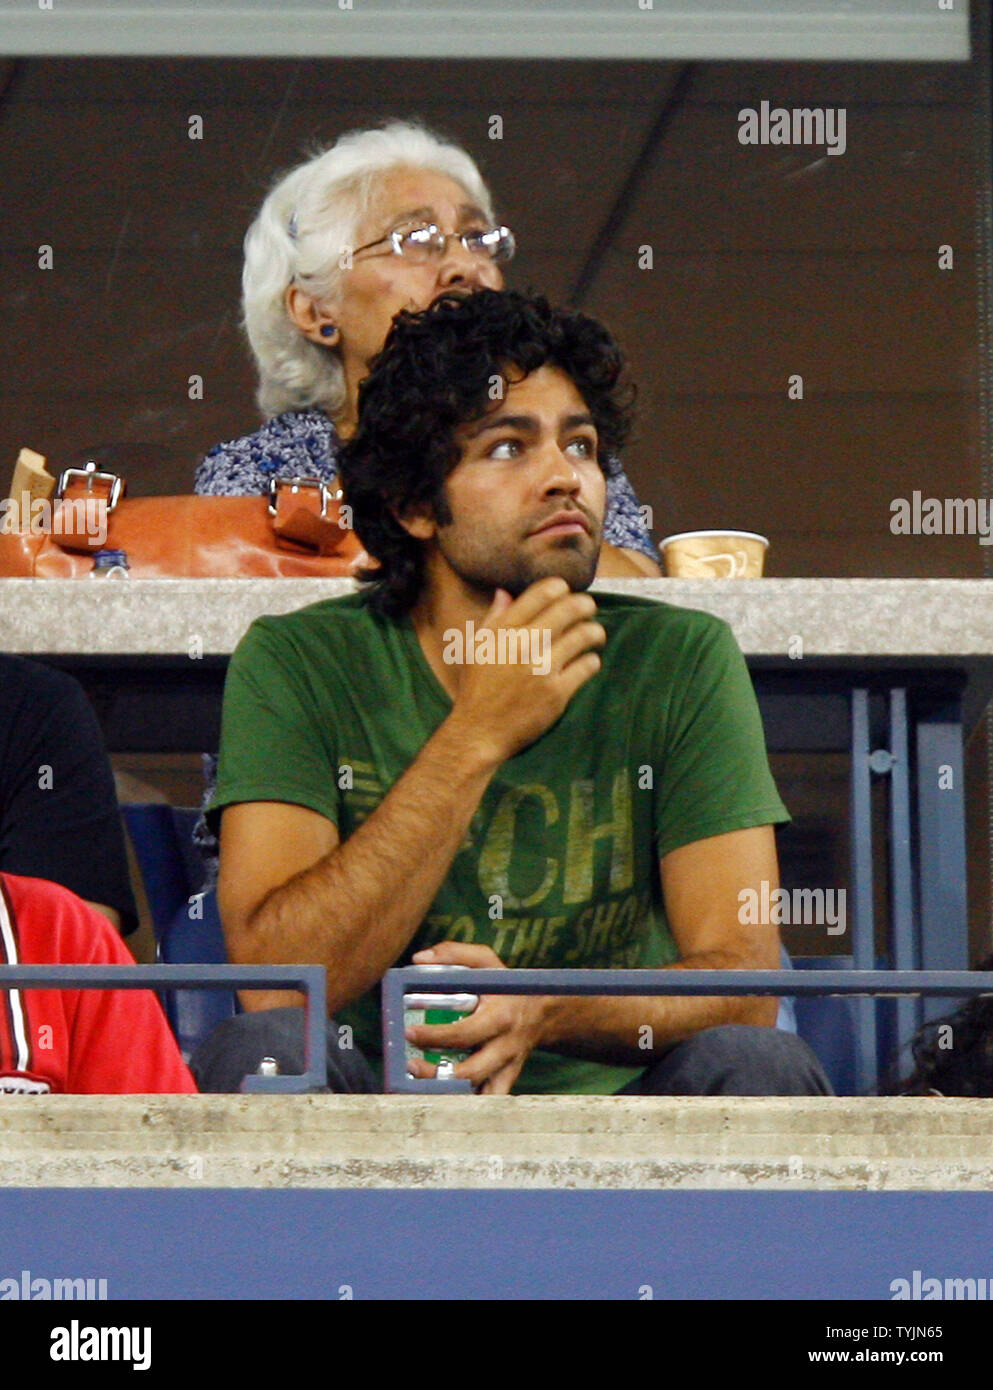 Entourage star, Adrian Grenier, watches Serena Williams play Severine Bremond on day eight at the U.S. Open Tennis Championships at the U.S. National Tennis Center in Flushing Meadows, New York on September 1, 2008. Williams defeated Bremond 6-2 6-2.         (UPI Photo/John Angelillo) Stock Photo